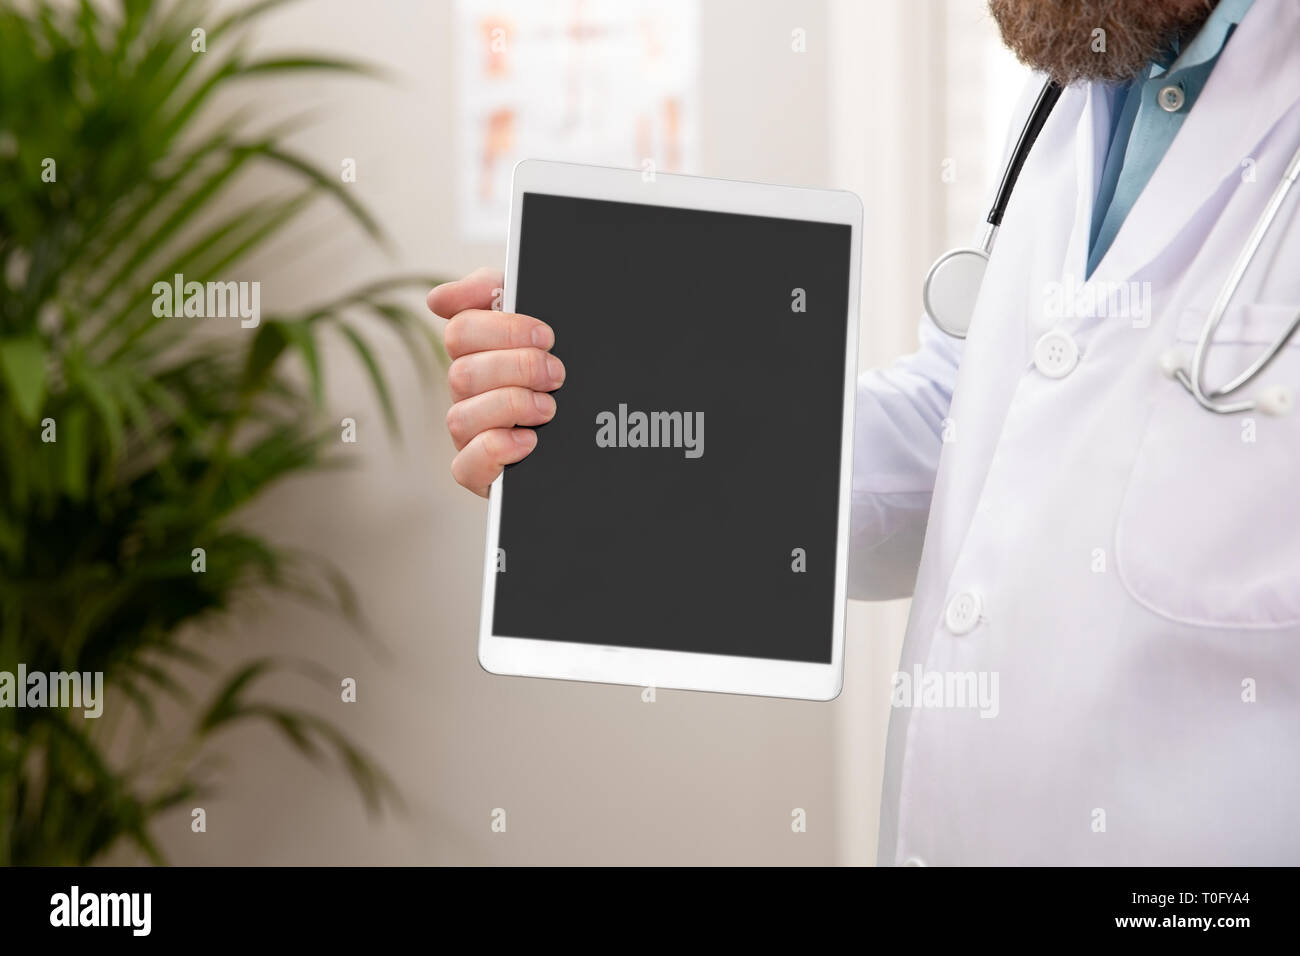 Adult male doctor showing a digital image or report on a tablet Stock Photo